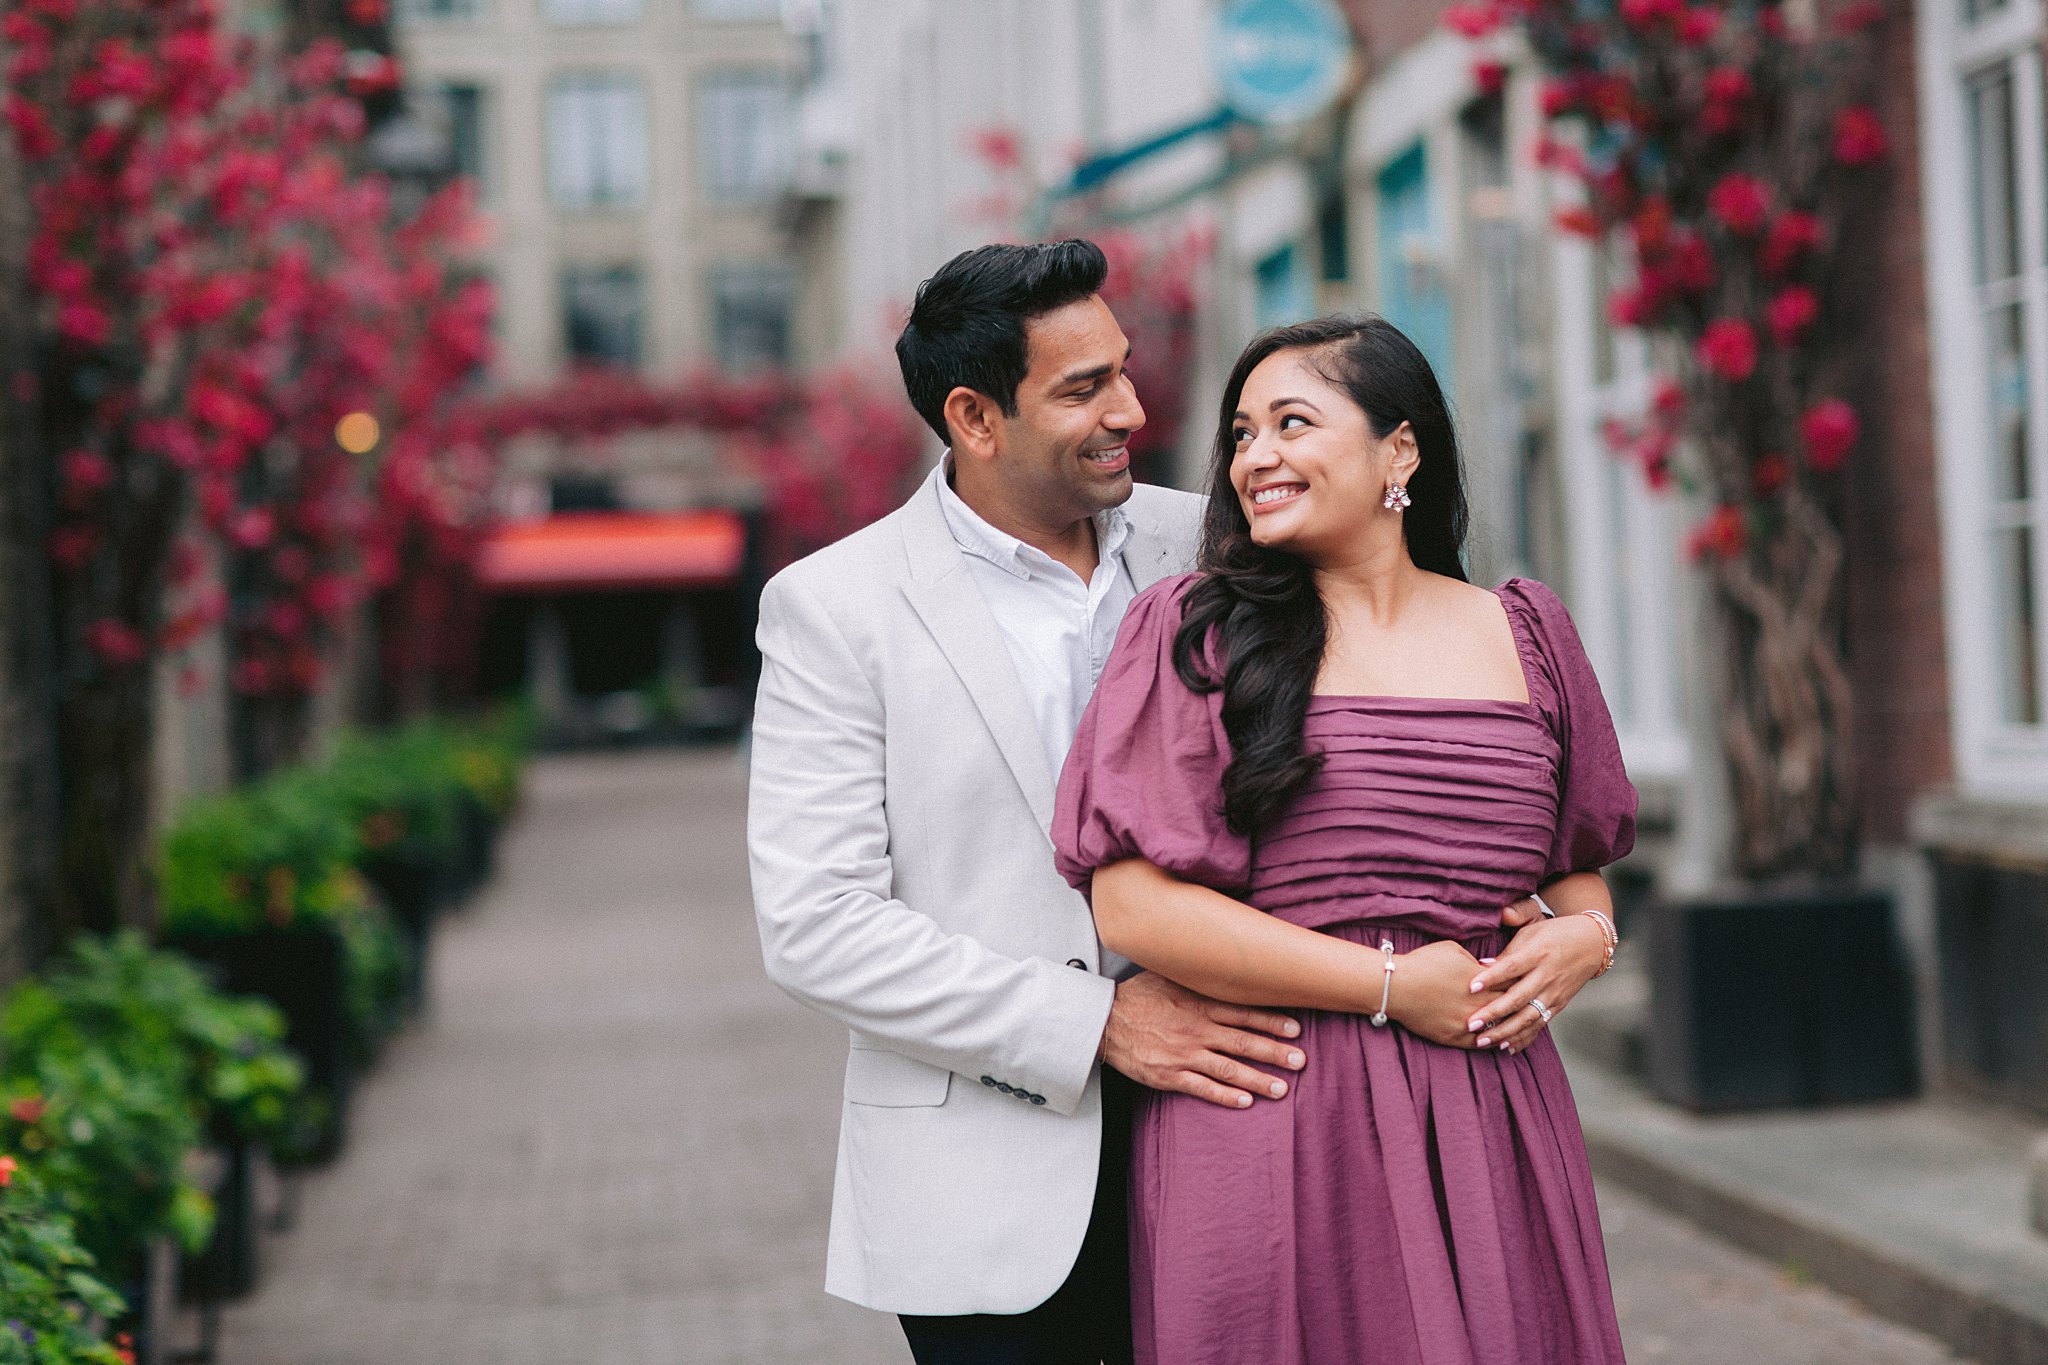 Lovebirds exploring Montreal together during their engagement session